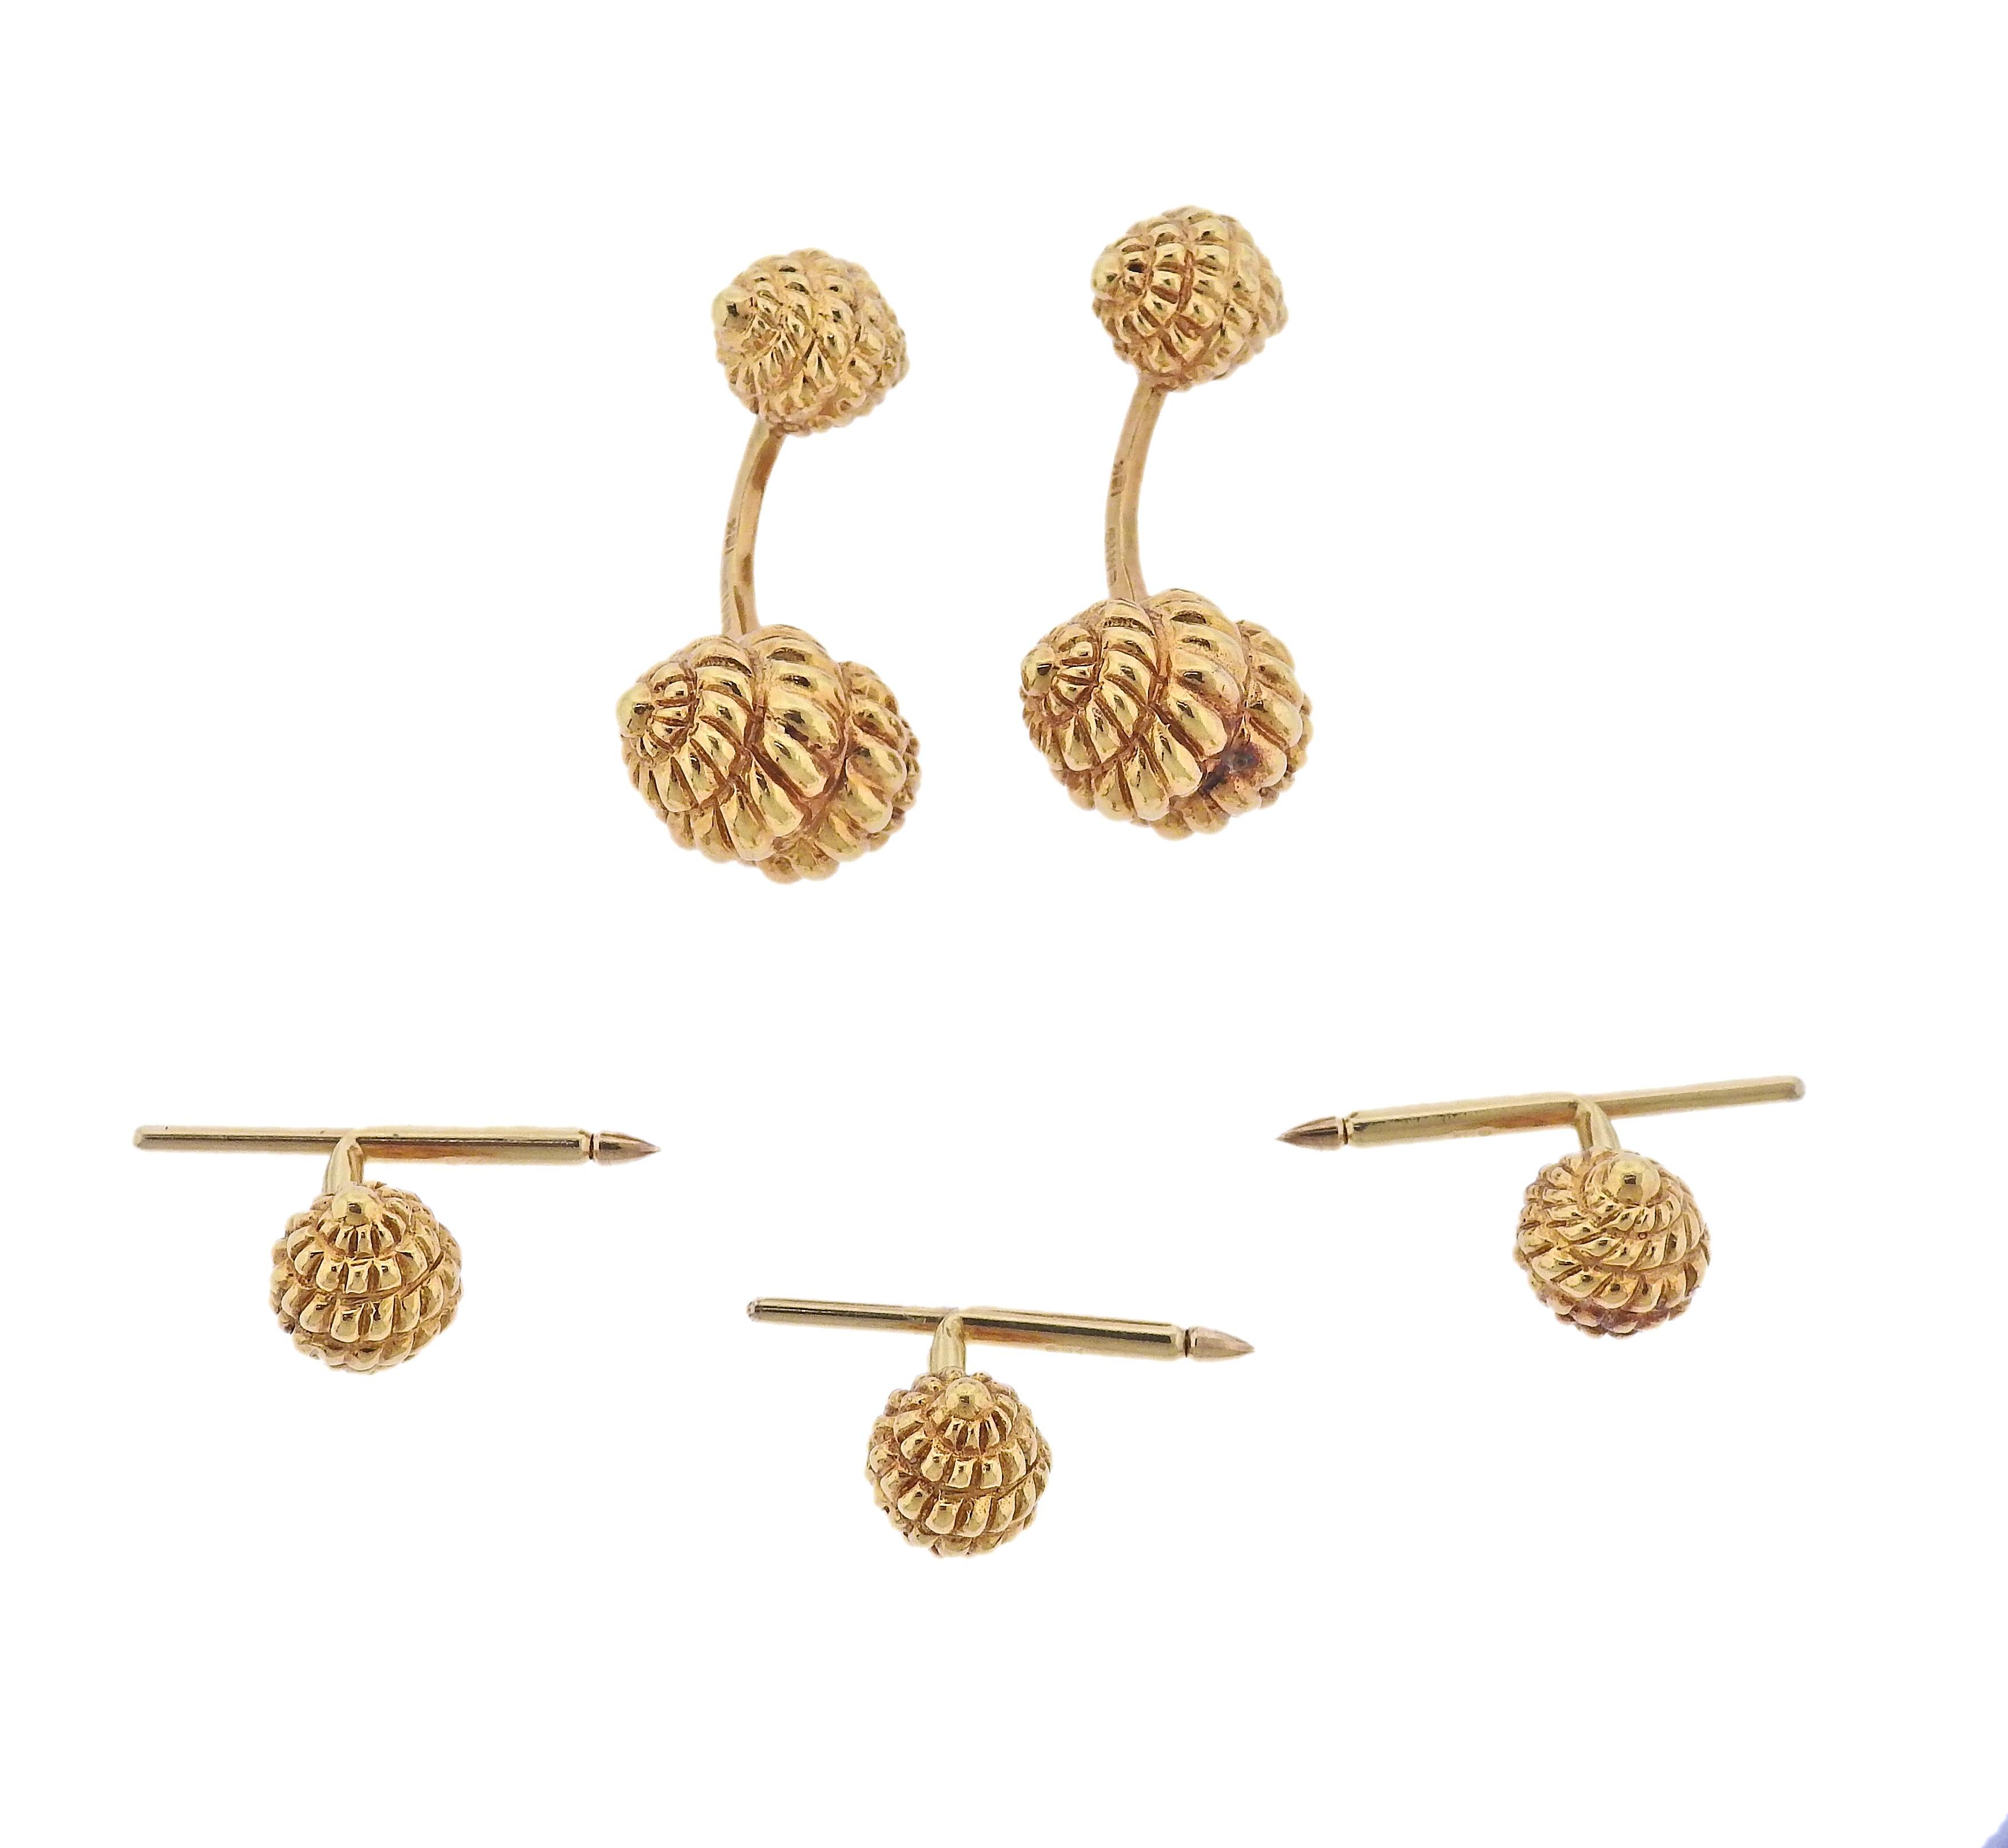 18k yellow gold woven cufflinks and stud set by Emis. Cufflink top is 20mm x 13mm,  back - 13mm x 10mm, Stud - 13mm x 10mm. Marked 18k Emis. Weight - 33.2 grams.